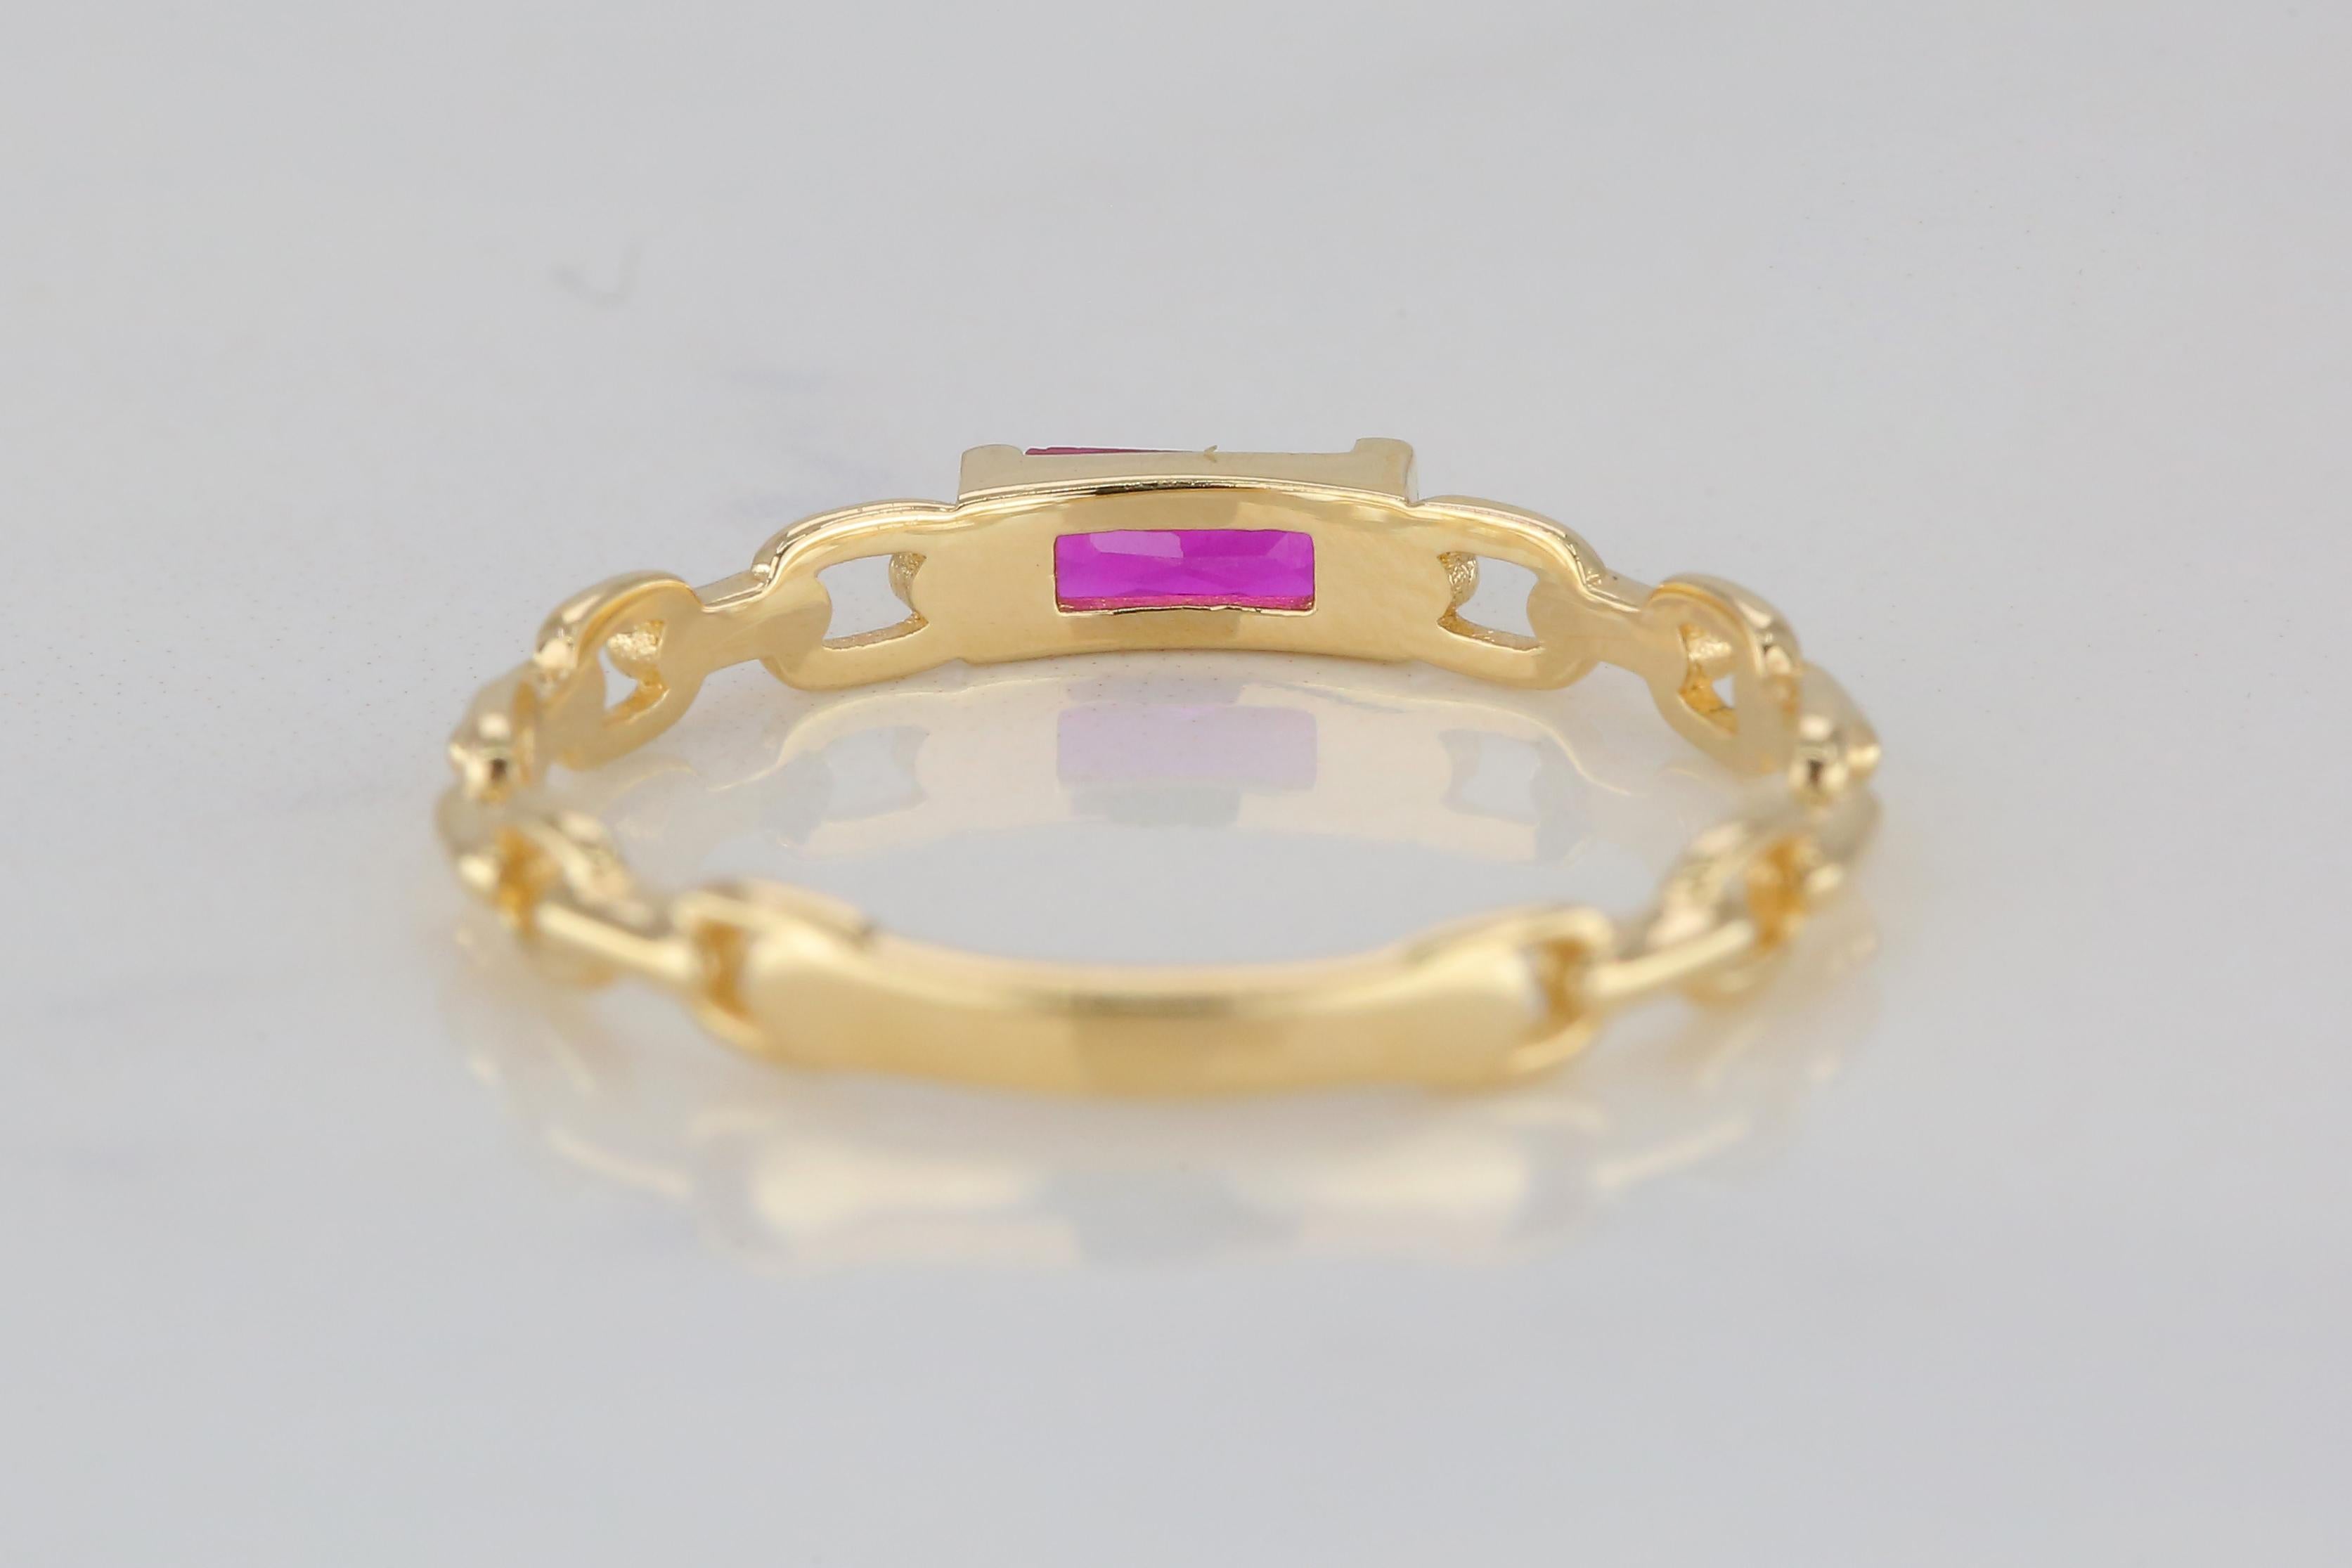 14K Gold Chain Link Ring with Pink Quartz 8